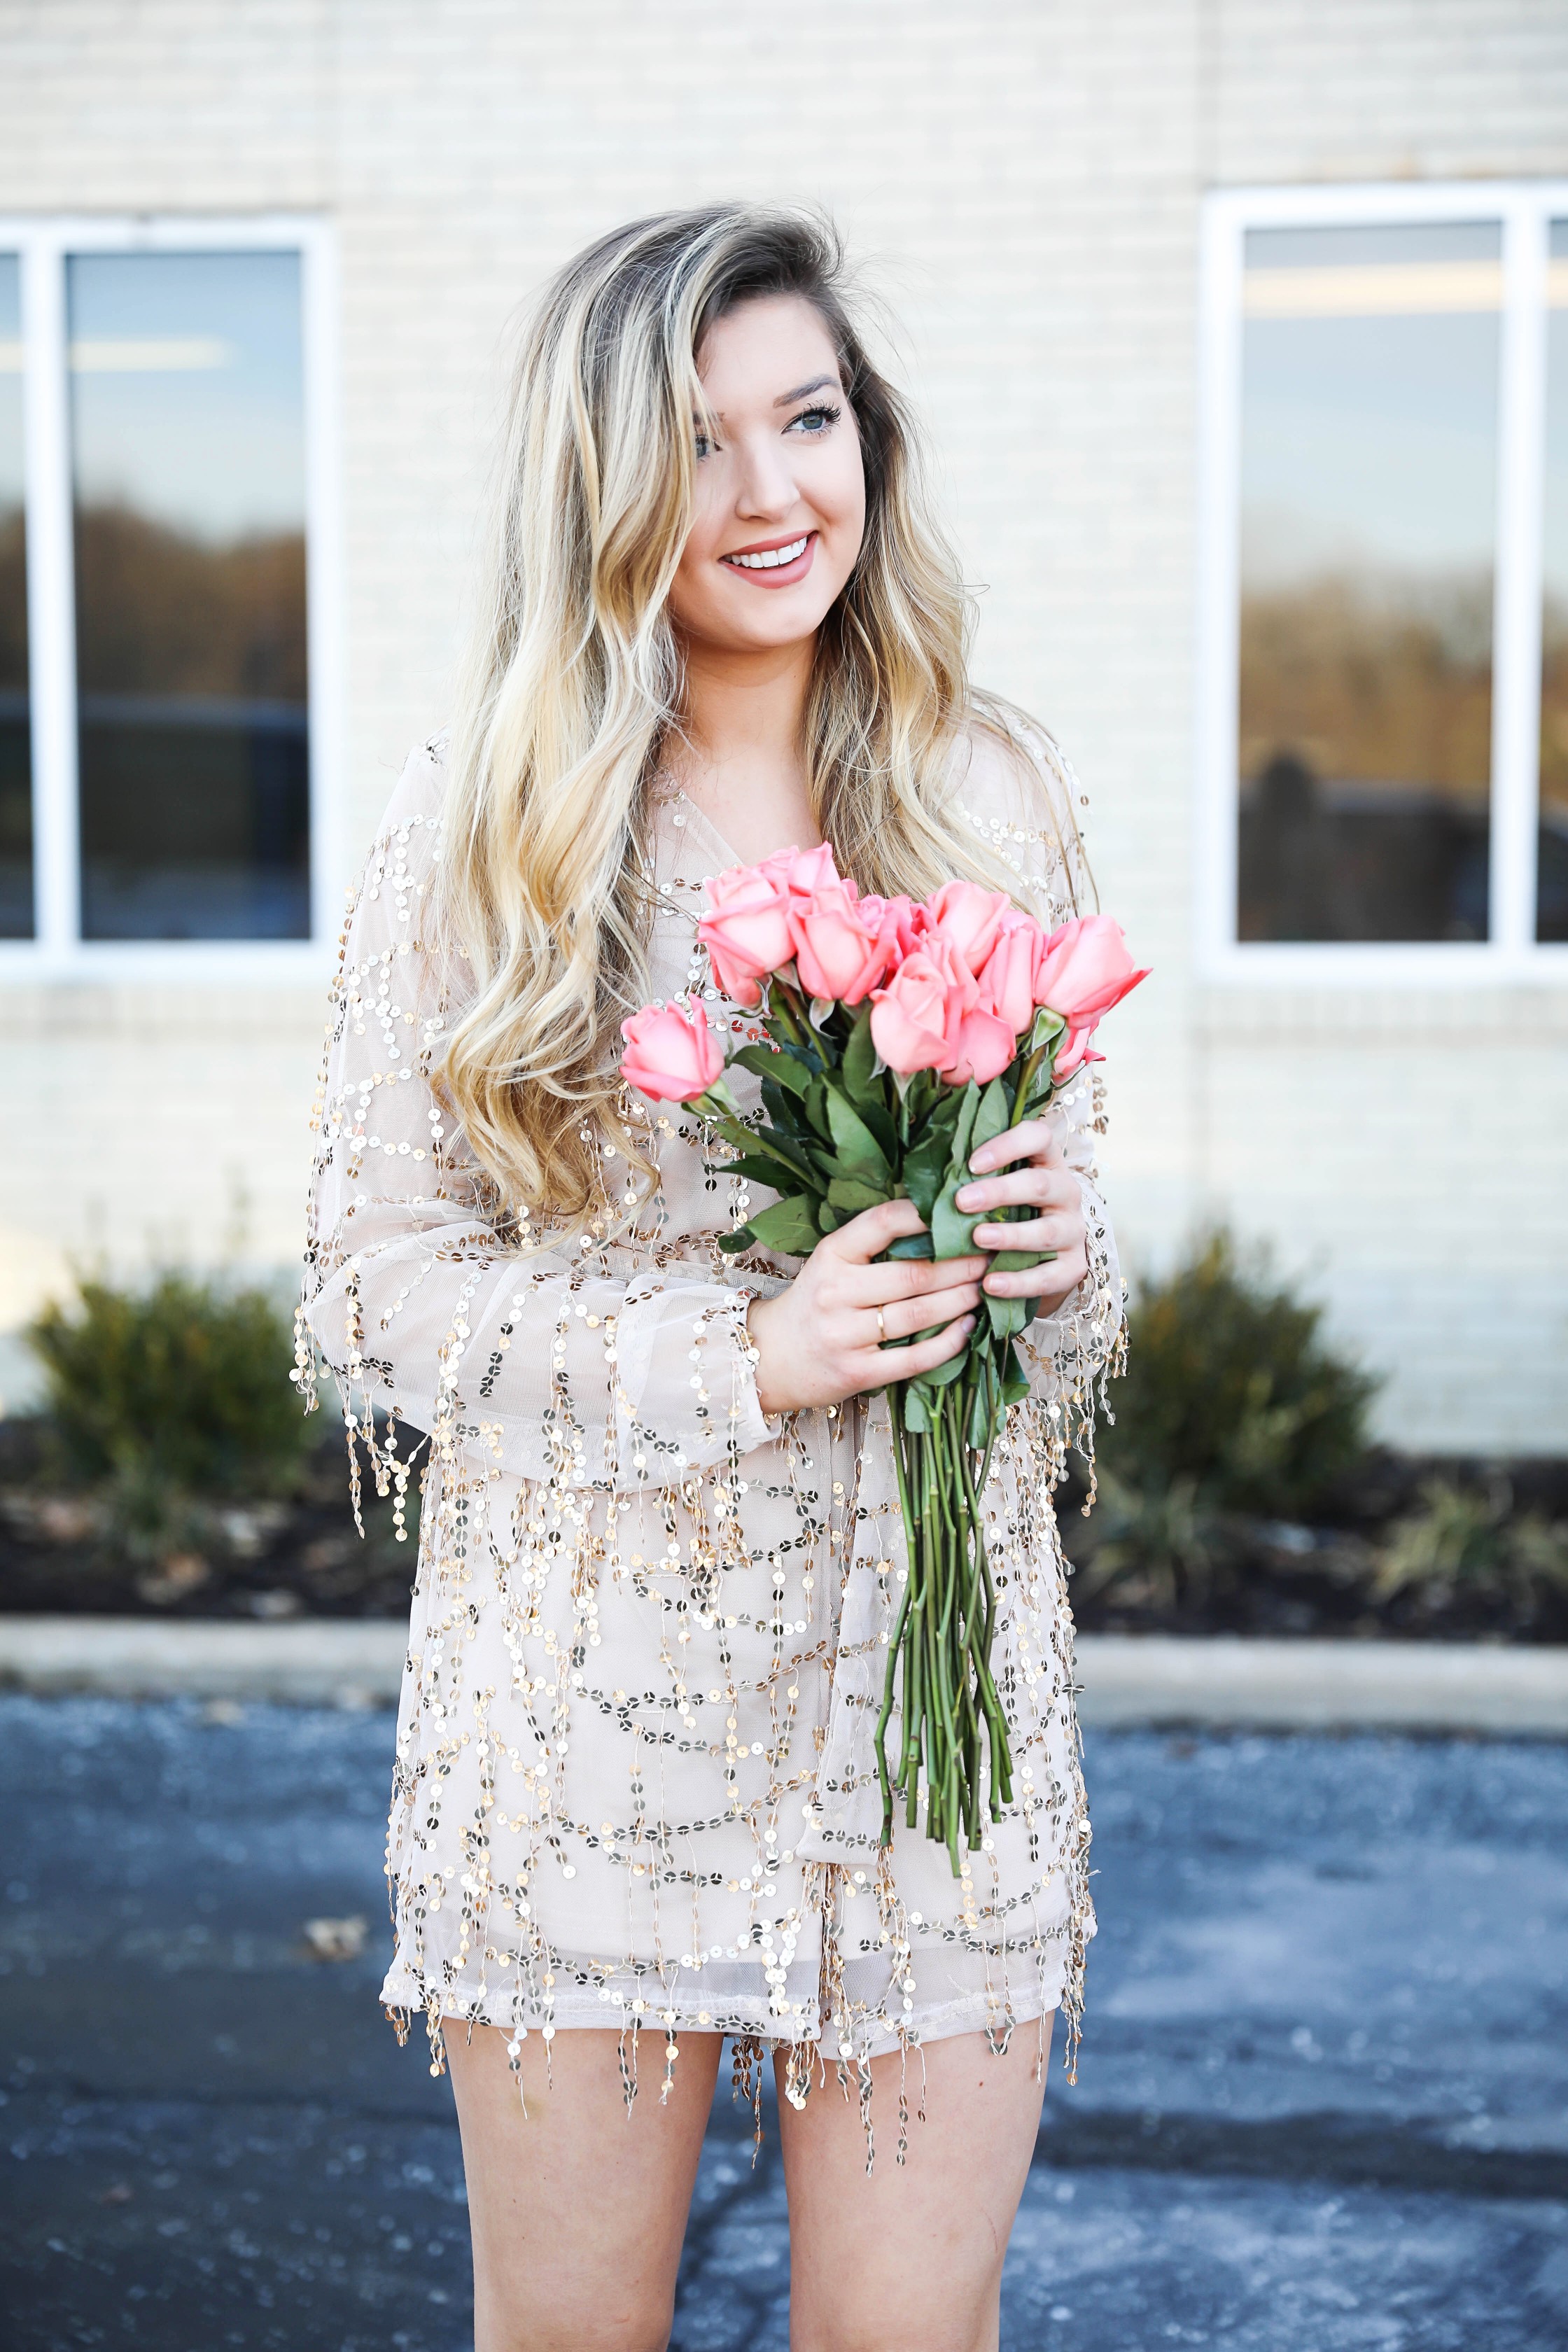 Gold sequin romper from MissGuided! Valentine's day romper! Girly date outfit! Blogger with rose bouquet on fashion blog daily dose of charm by lauren lindmark